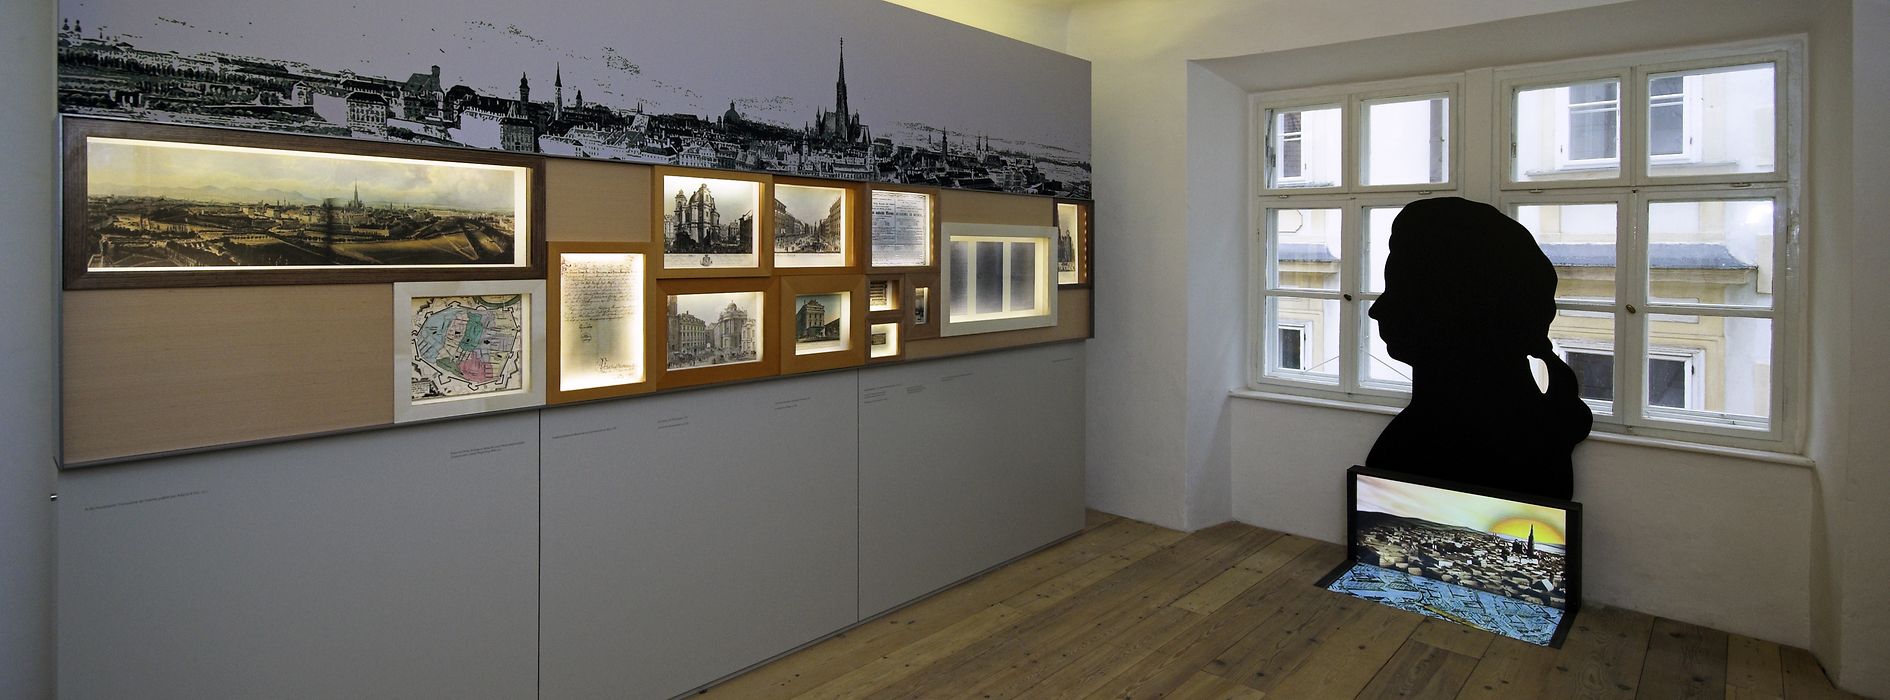 Exhibition room in the Mozarthaus 